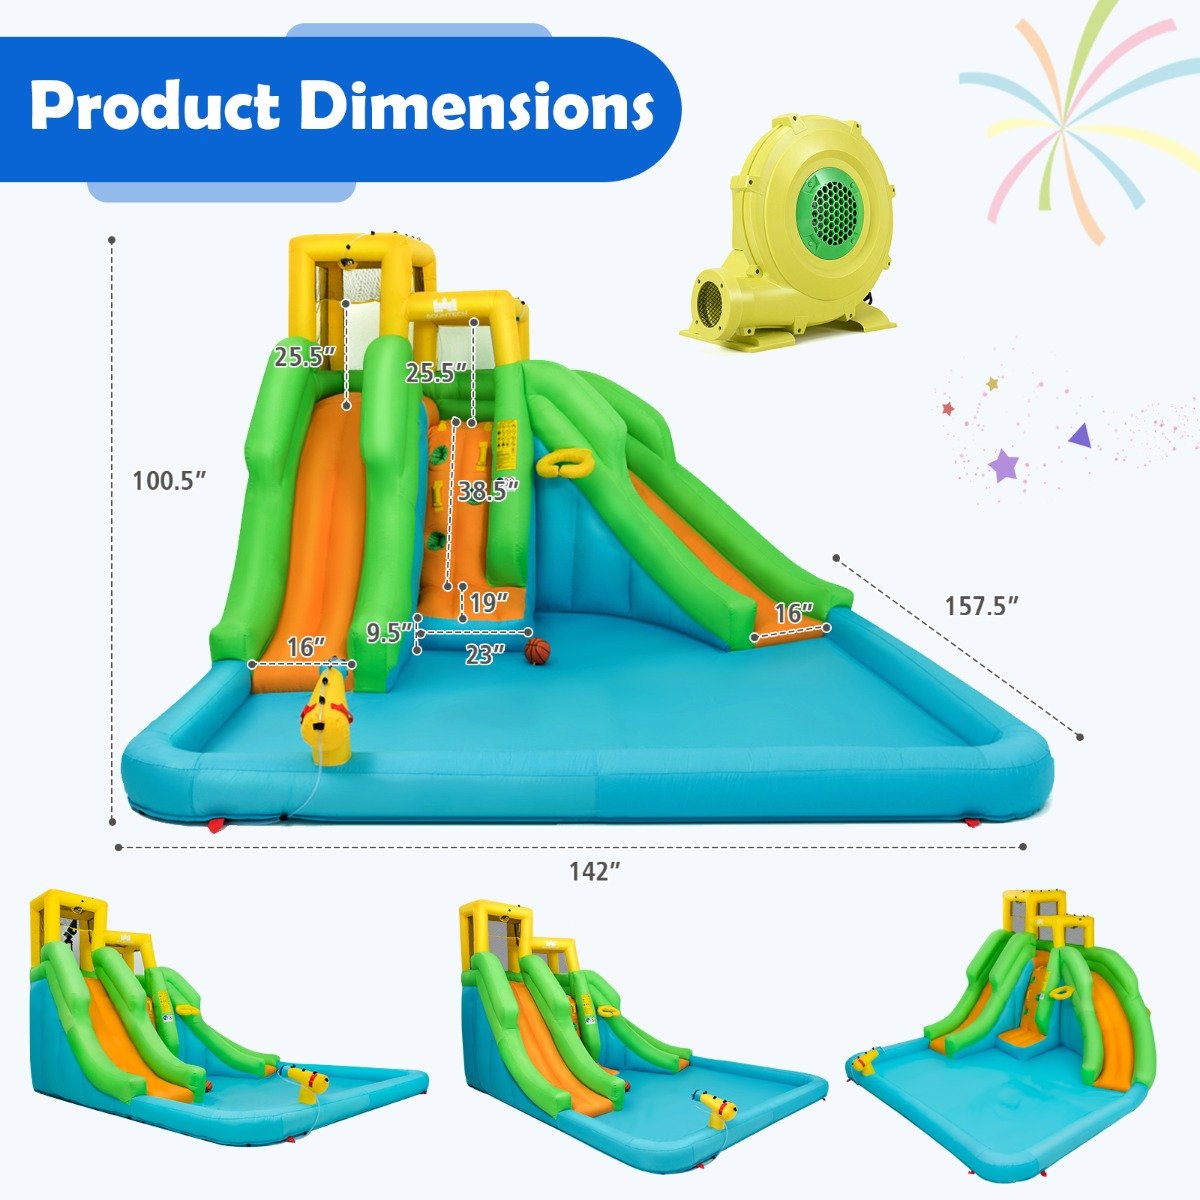 Outdoor Delight: Inflatable Water Park with Dual Slides